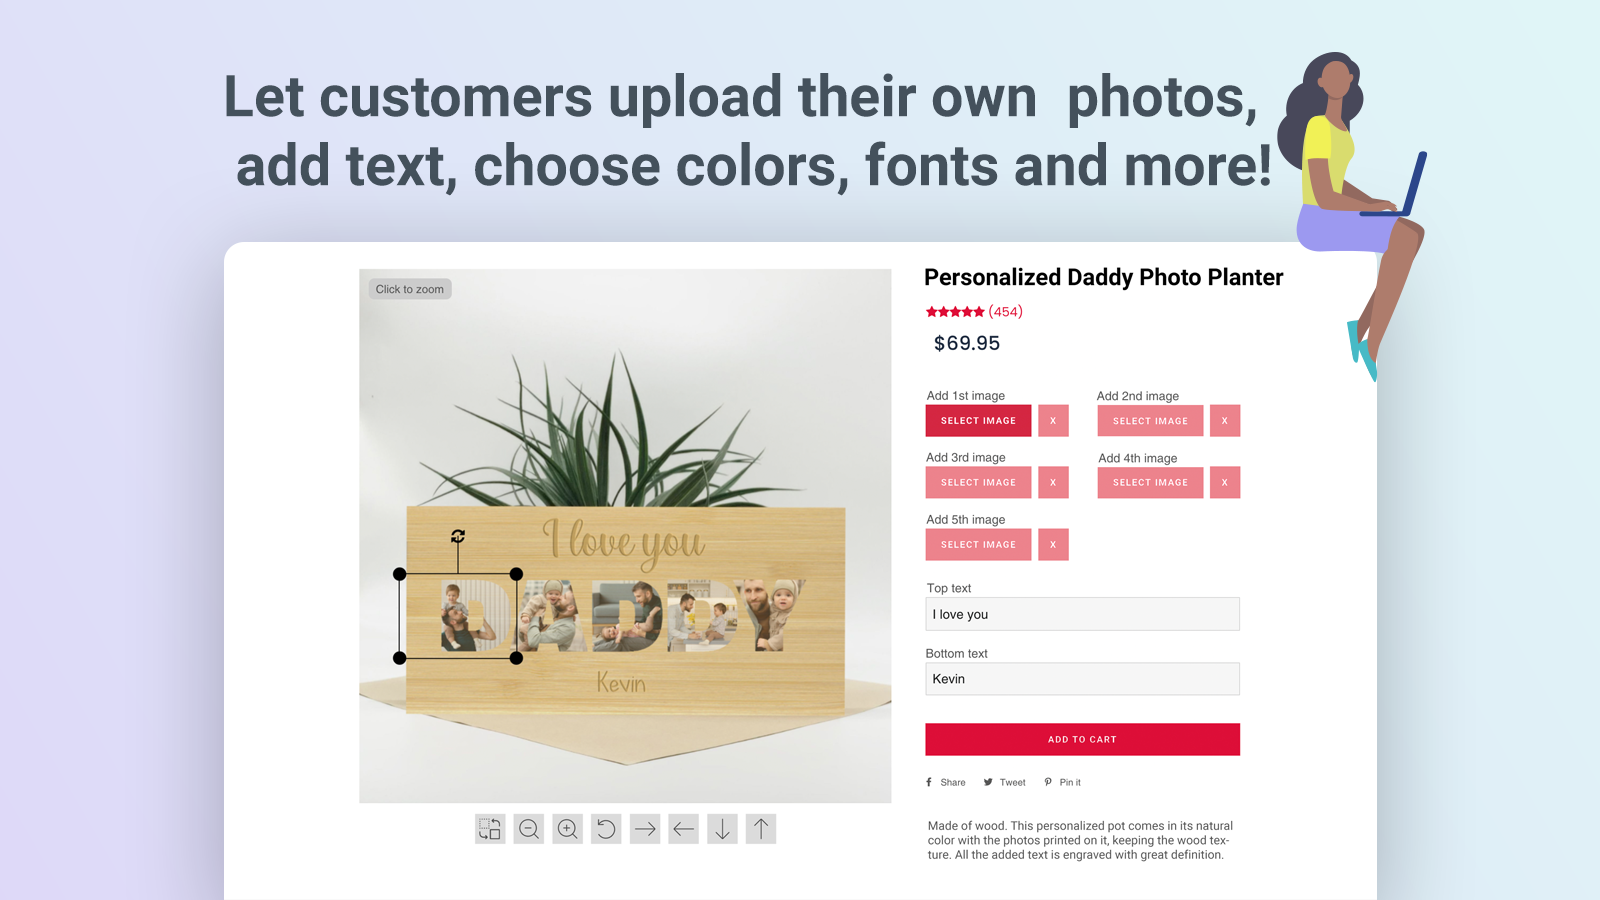 Let customers upload their own photos, add text, choose colors, fonts and more!